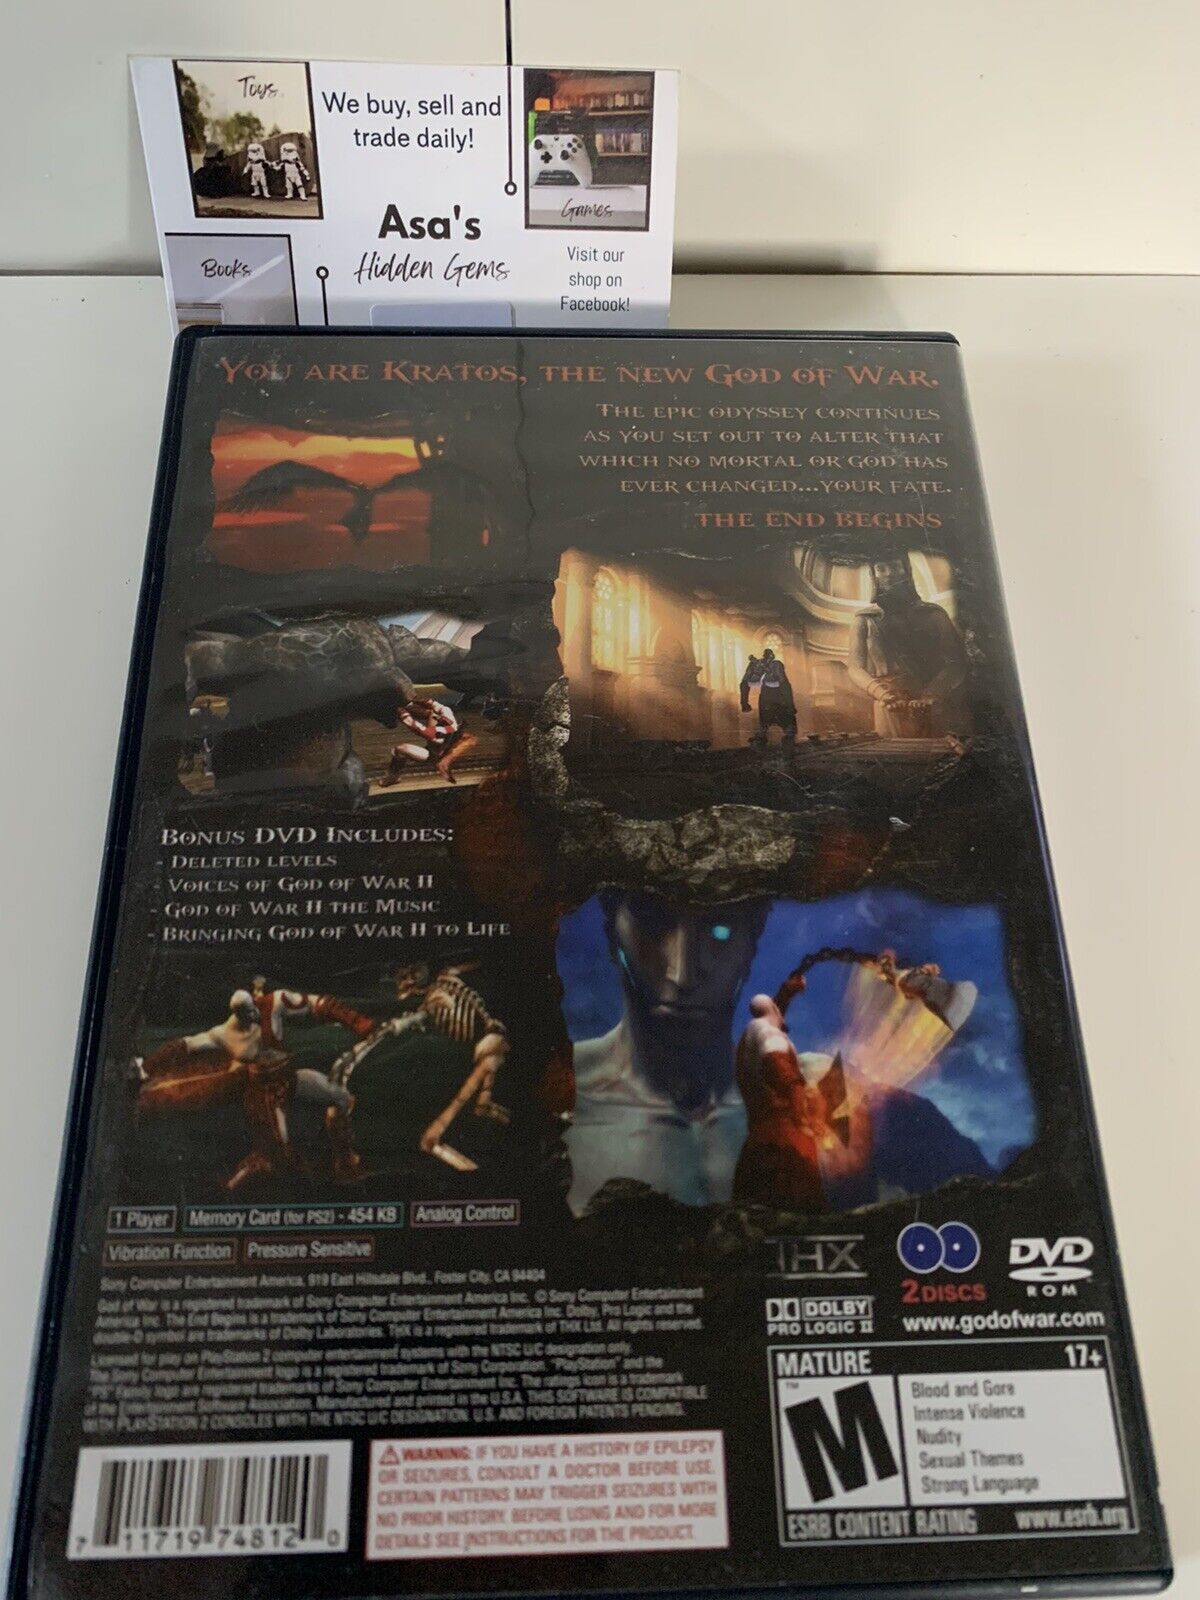 God of War II - Two Disc Set (Sony PlayStation 2) PS2 CIB Complete - Action Game